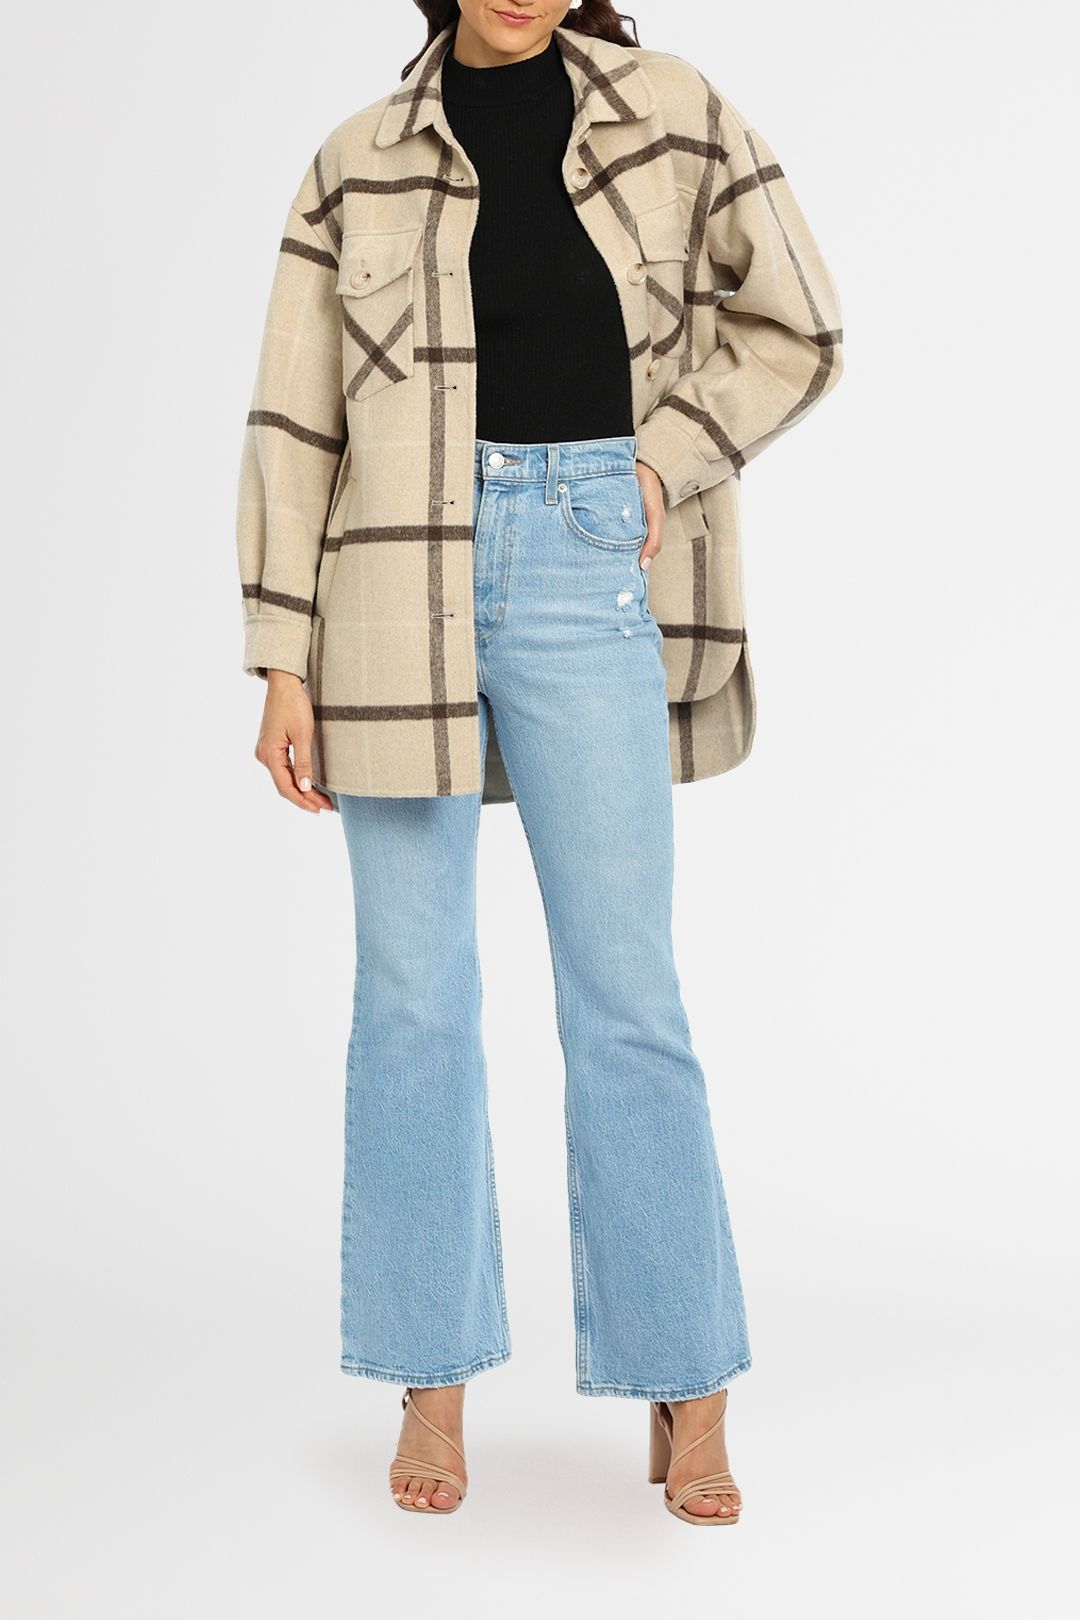 Belle and Bloom River’s Edge Plaid Shacket Beige